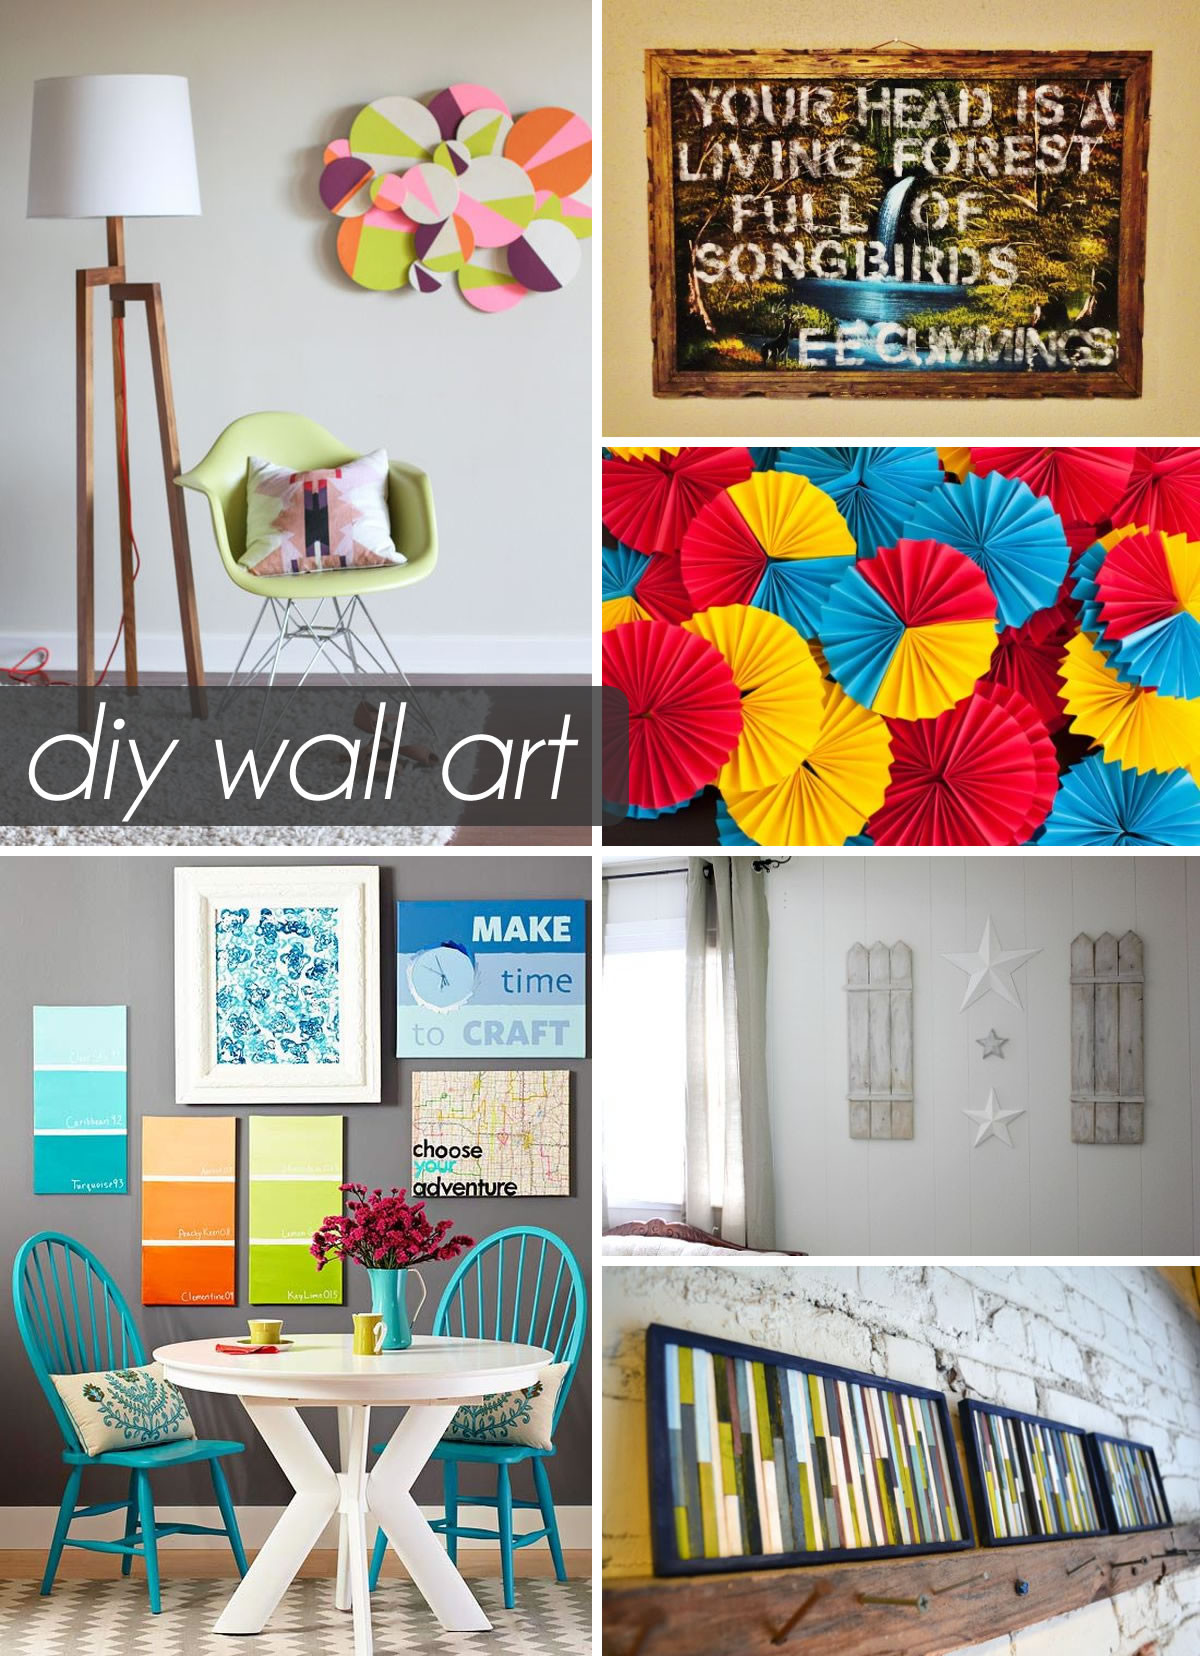 Wall Decorating Ideas DIY
 50 Beautiful DIY Wall Art Ideas For Your Home